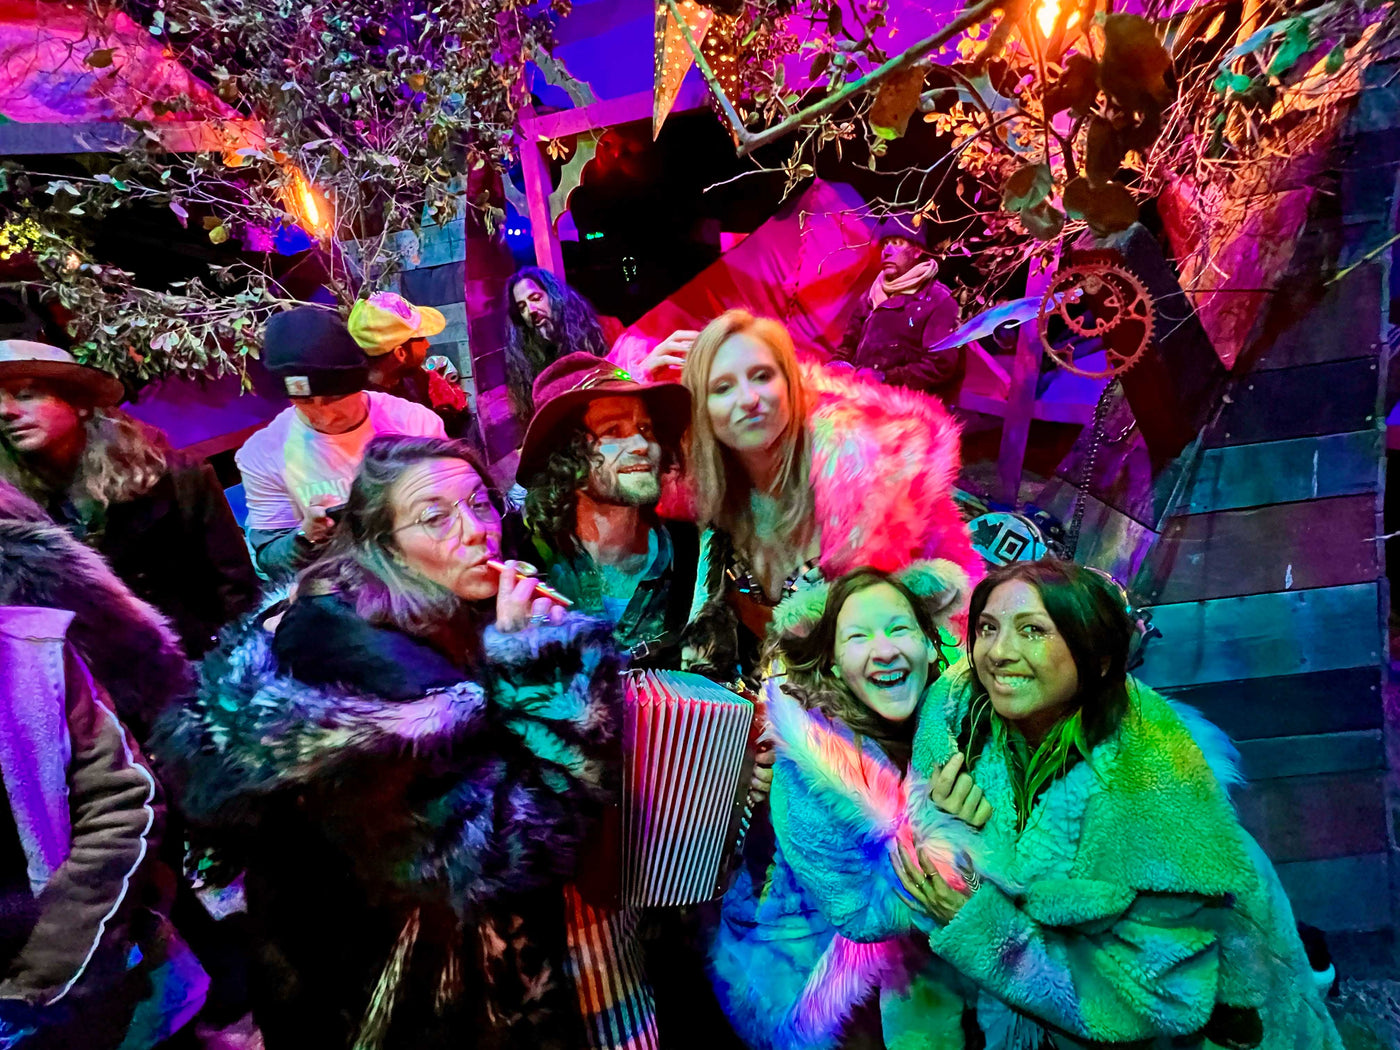 How to stay warm at Lucidity Festival, Santa Barbara, CA